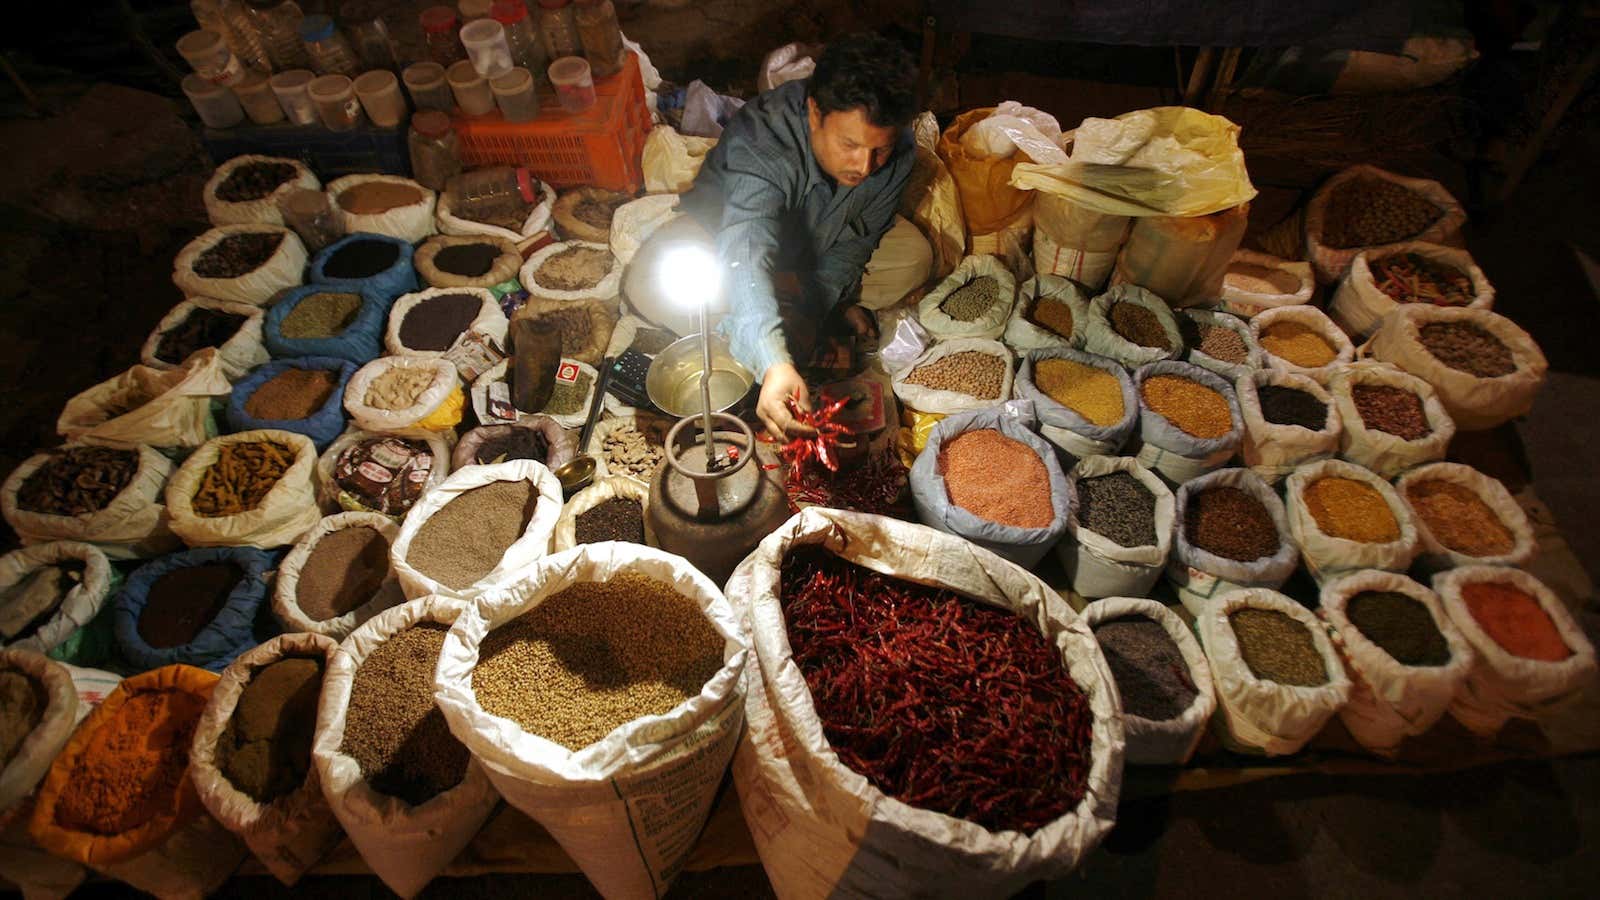 Land of mixing spices, but also mixing medicines.